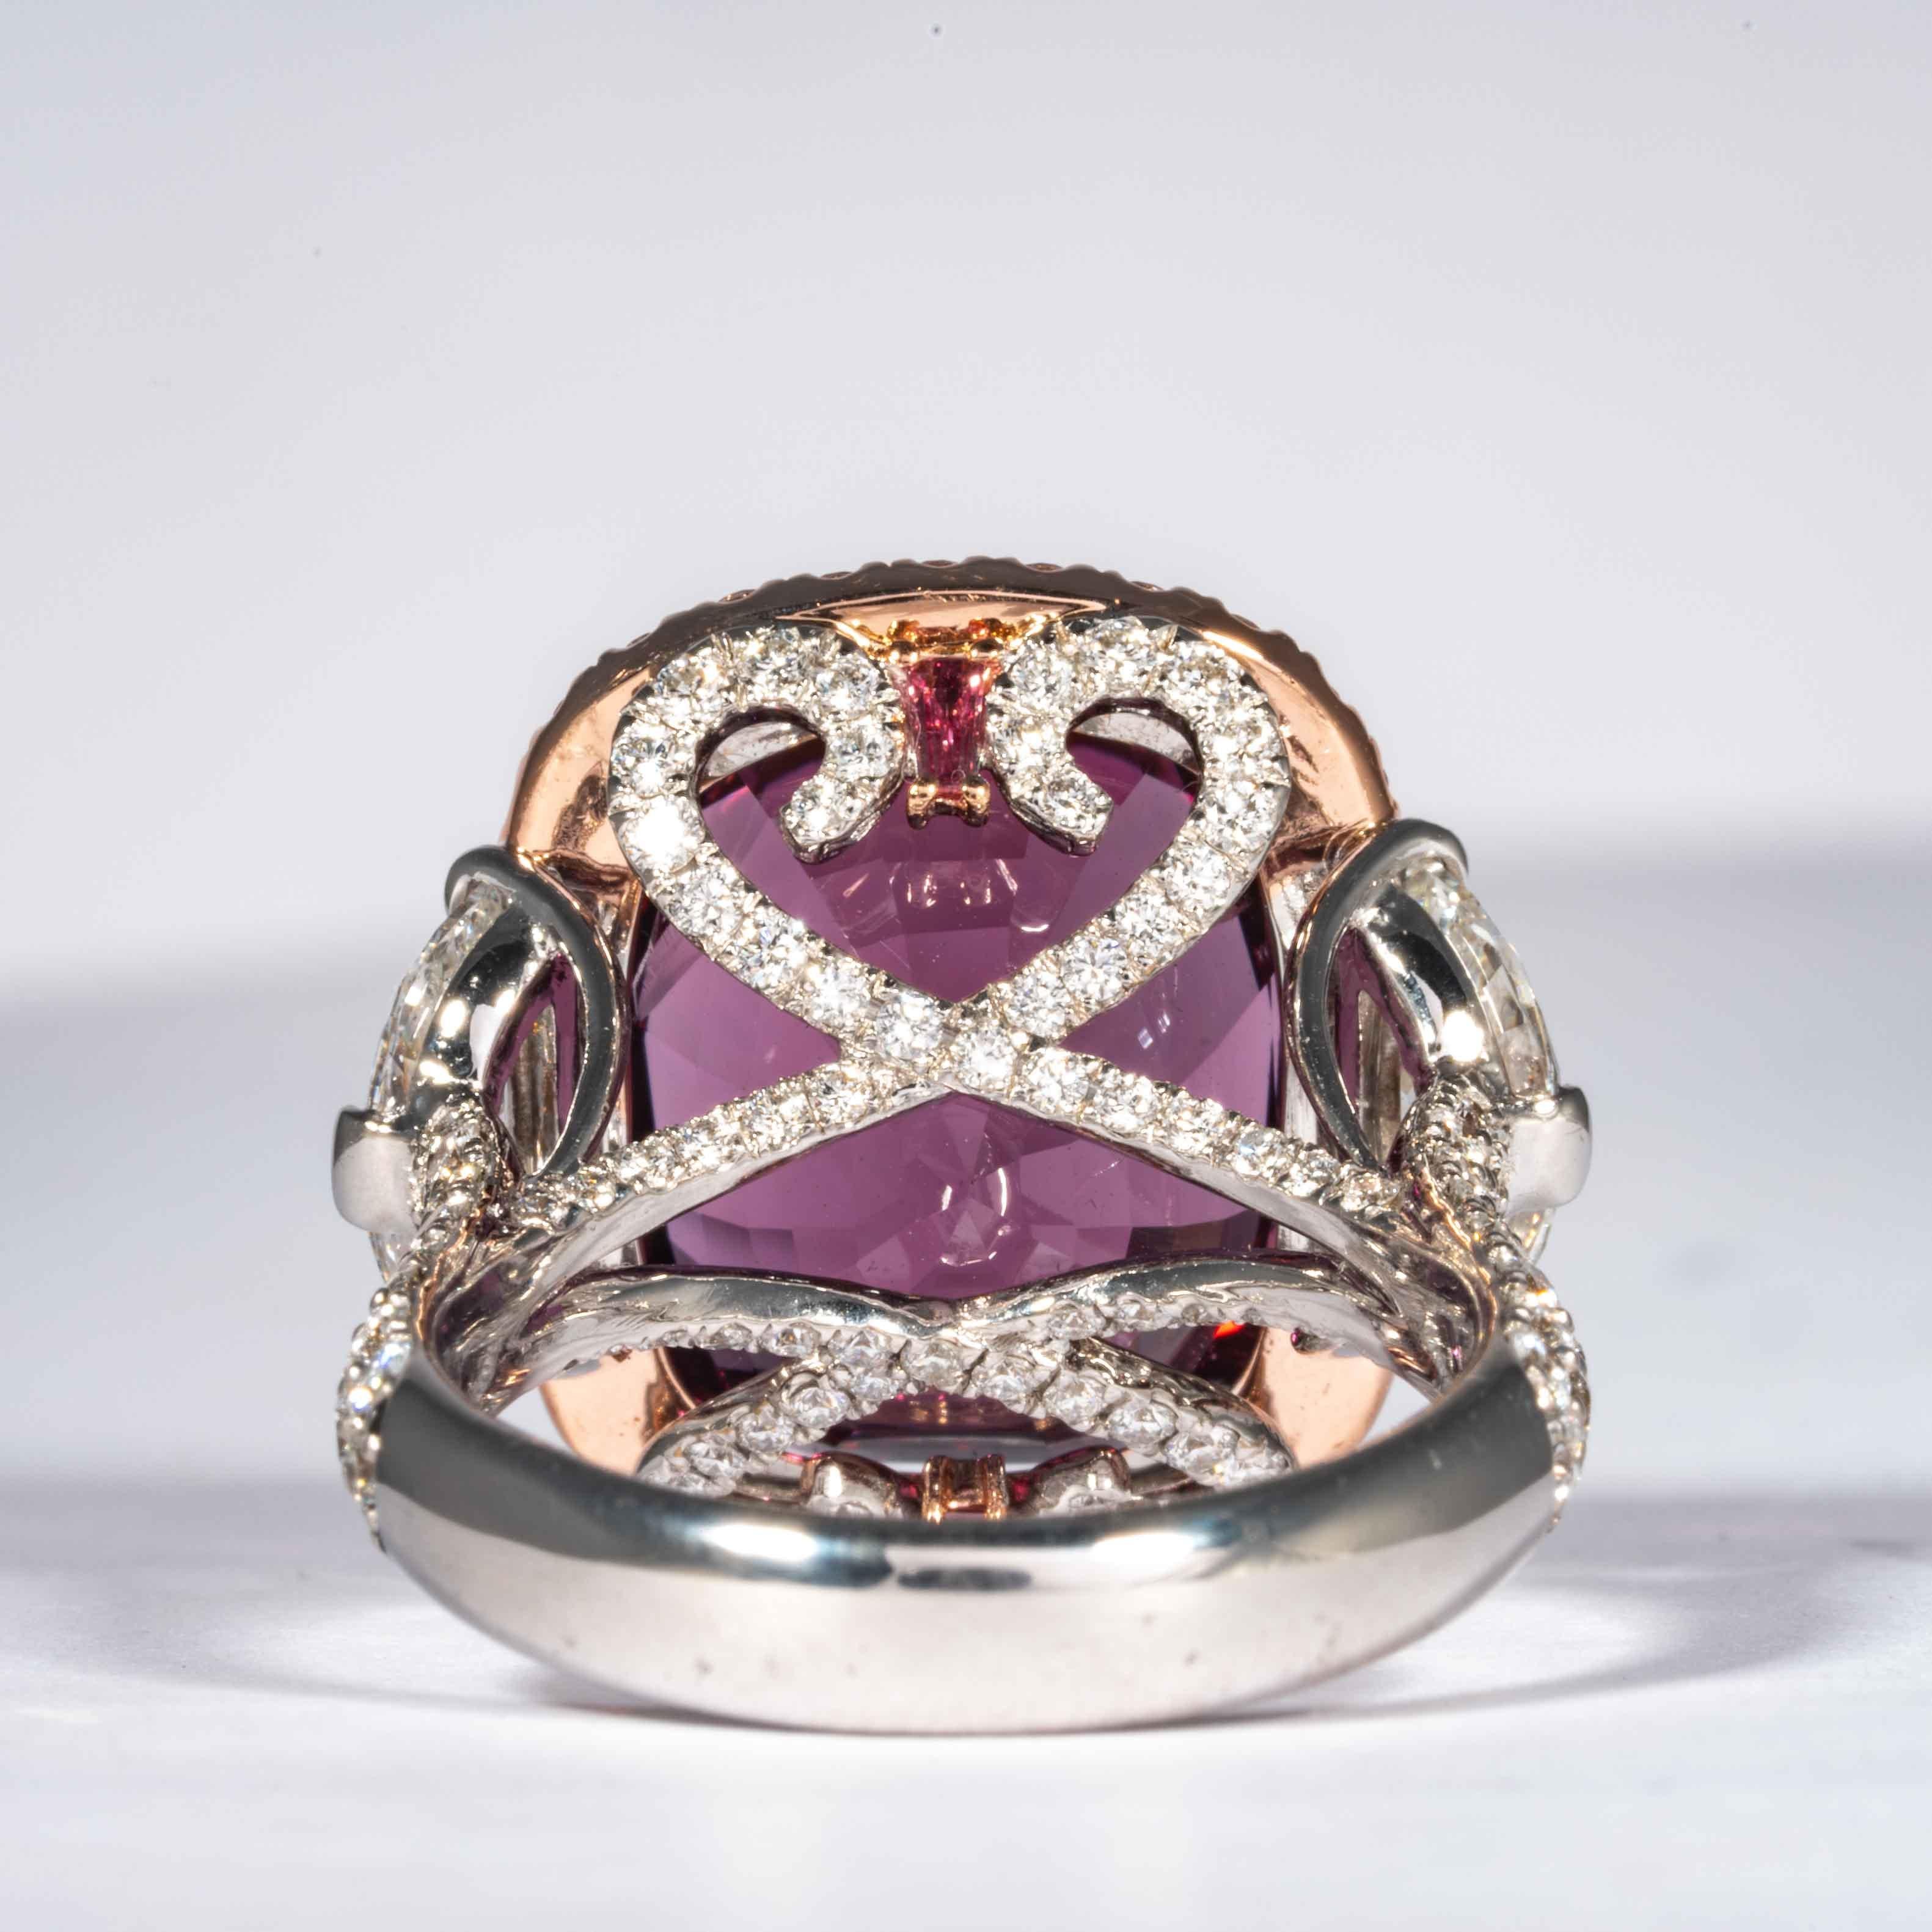 Shreve, Crump & Low 15.38 Carat Burmese Pink Spinel and Diamond Ring 'Dungaire' 5